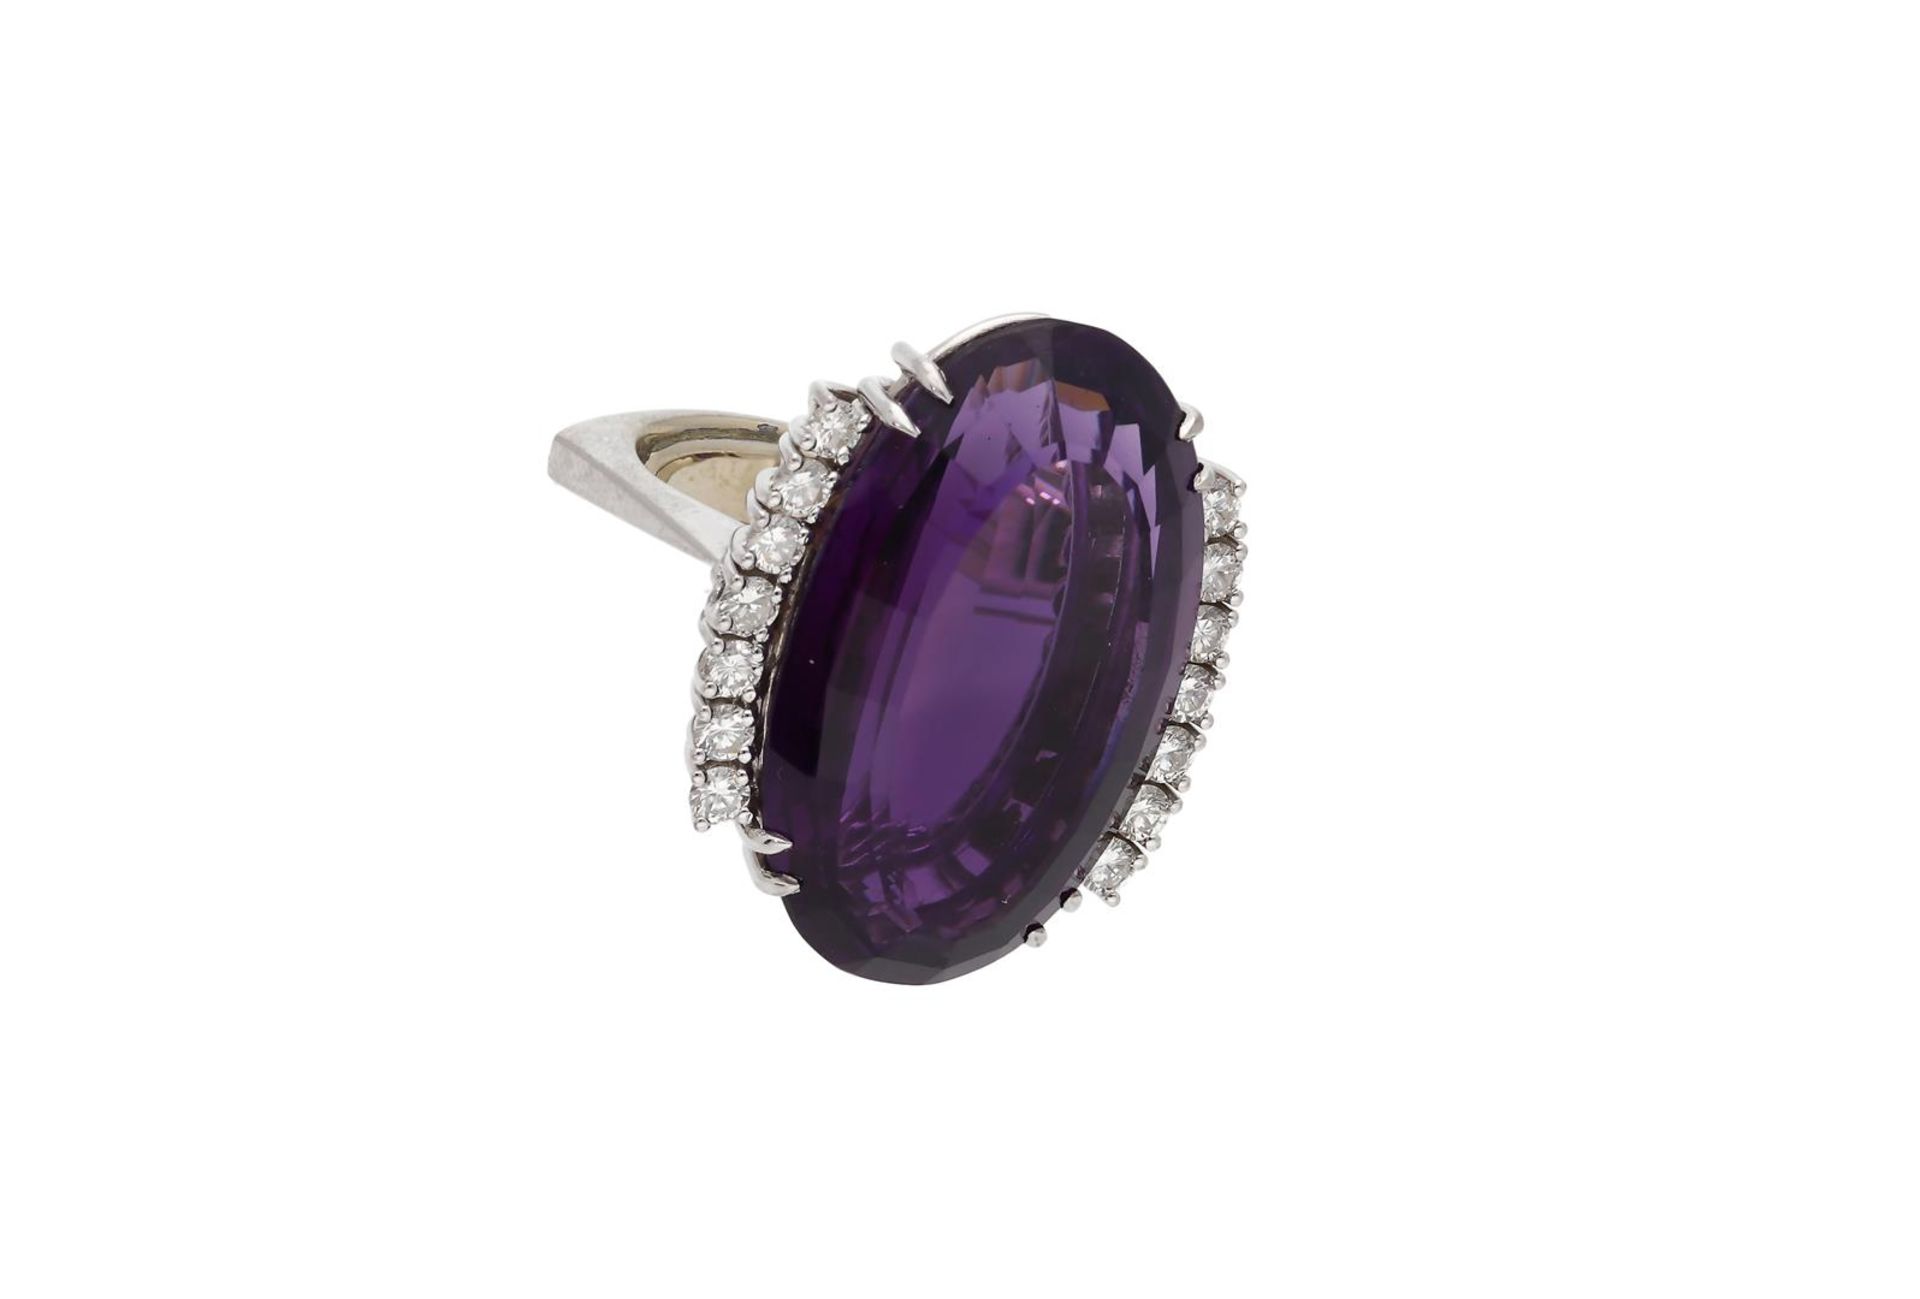 A 18-kt white gold ring, set with an oval cut amethyst of approx. 28,97 ct. flanked by brilliant cut